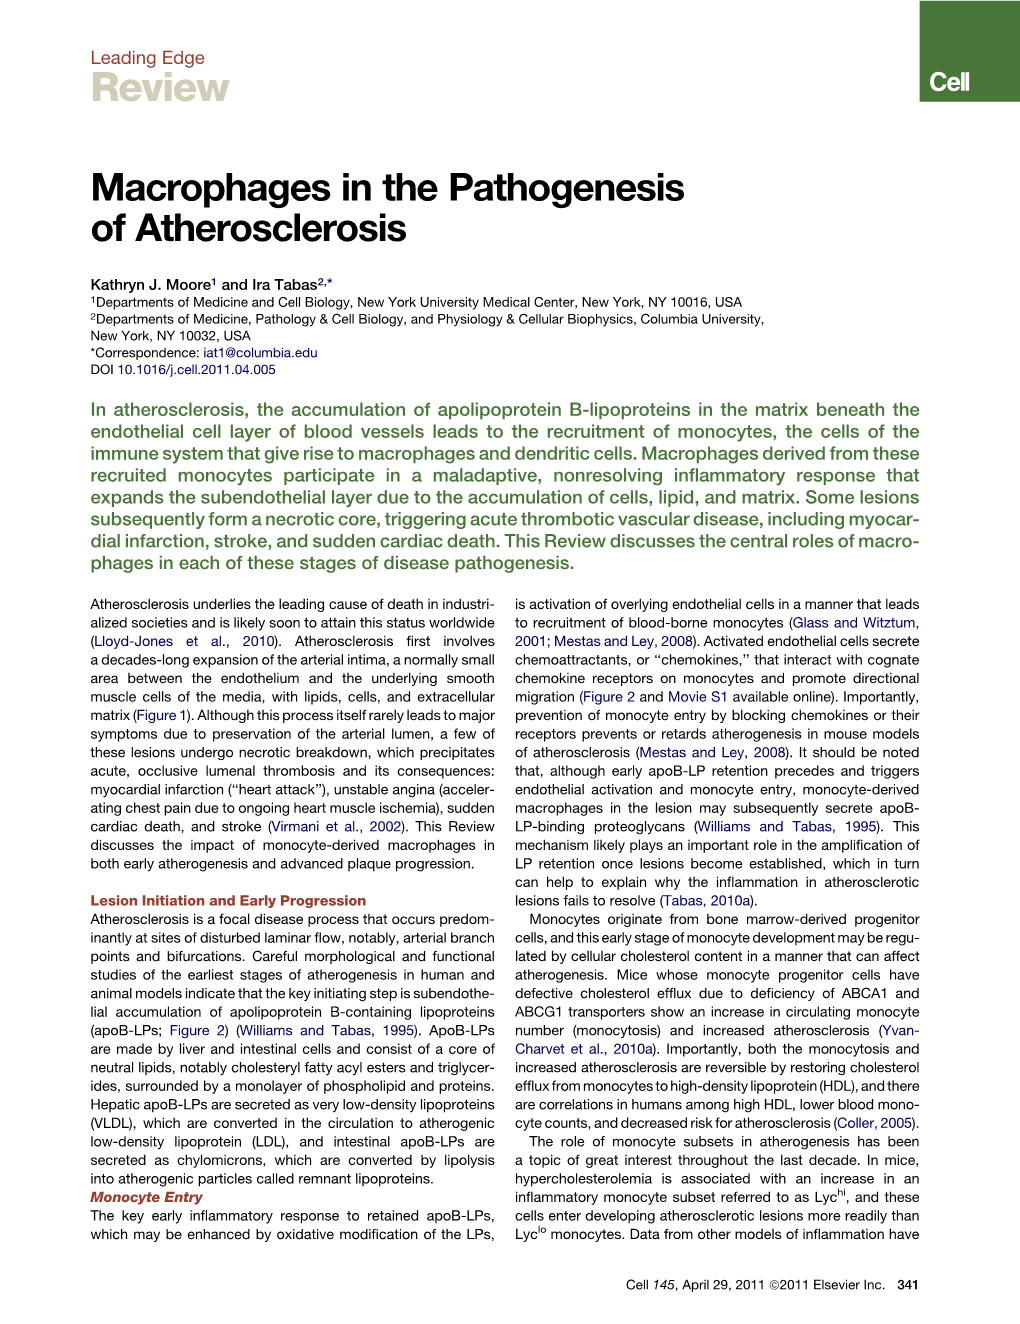 Macrophages in the Pathogenesis of Atherosclerosis